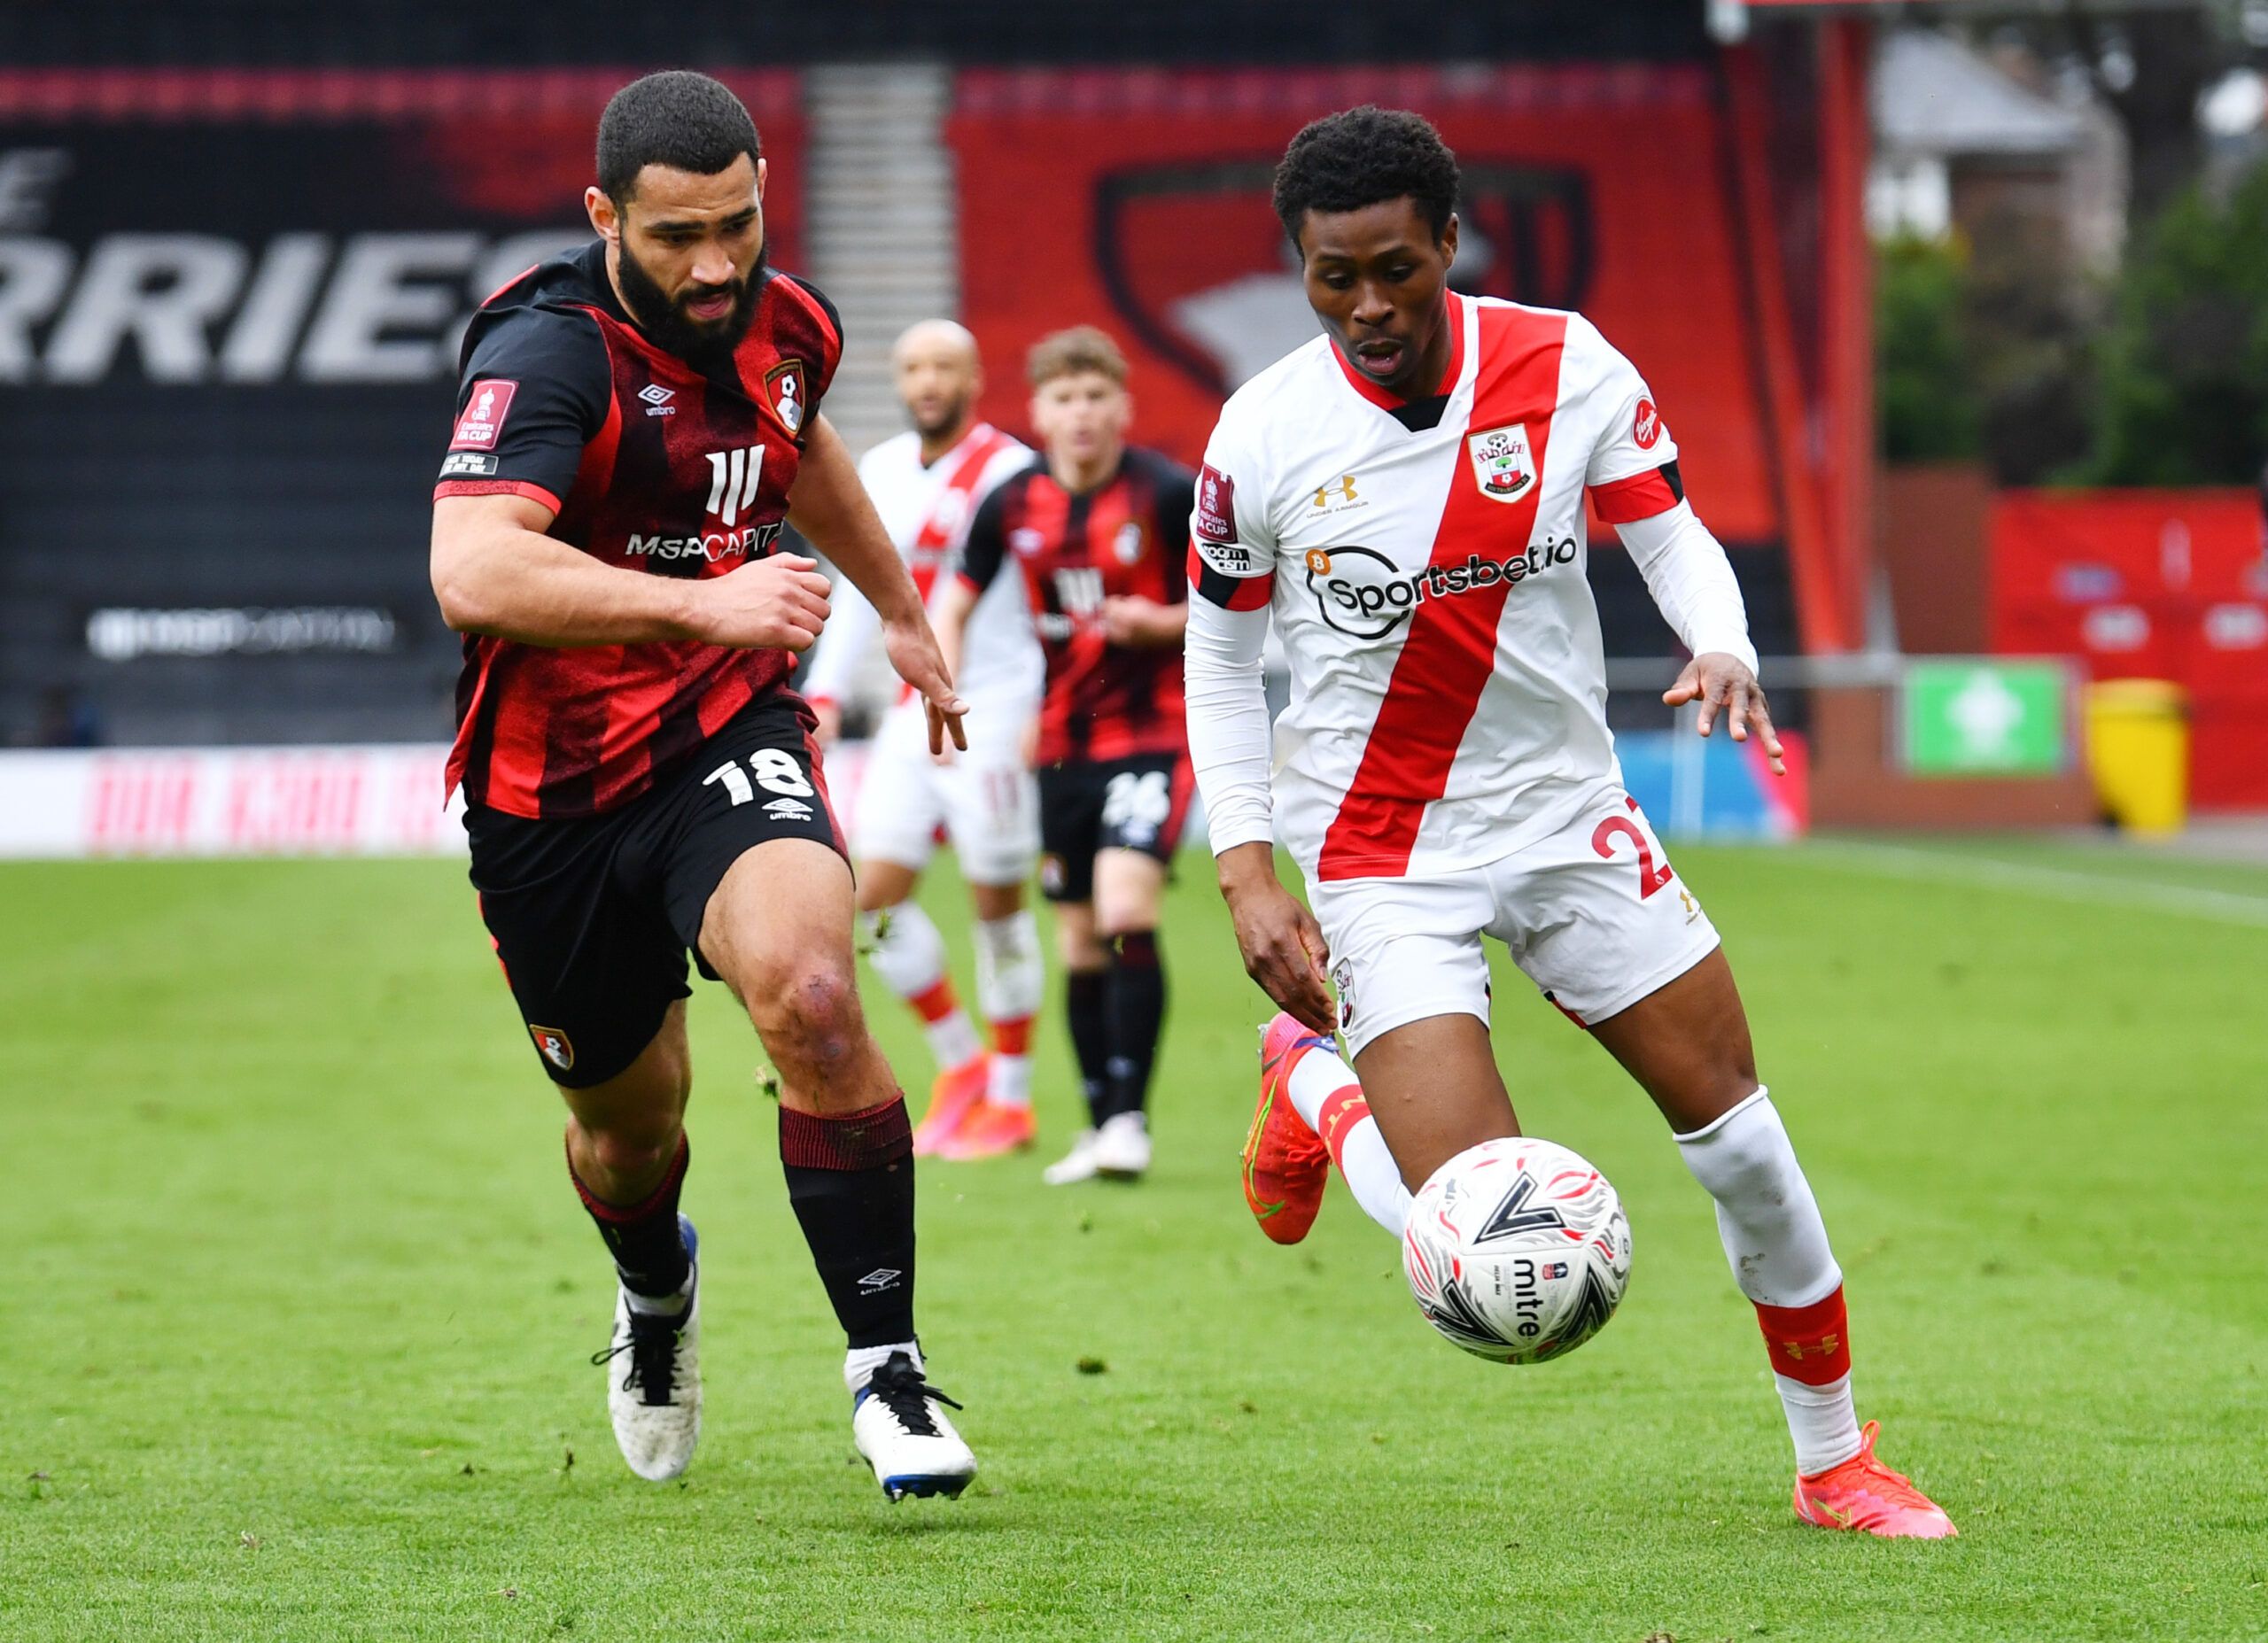 Soccer Football - FA Cup Quarter Final - AFC Bournemouth v Southampton - Vitality Stadium, Bournemouth, Britain - March 20, 2021 Southampton's Nathan Tella in action with AFC Bournemouth's Cameron Carter-Vickers REUTERS/Dylan Martinez